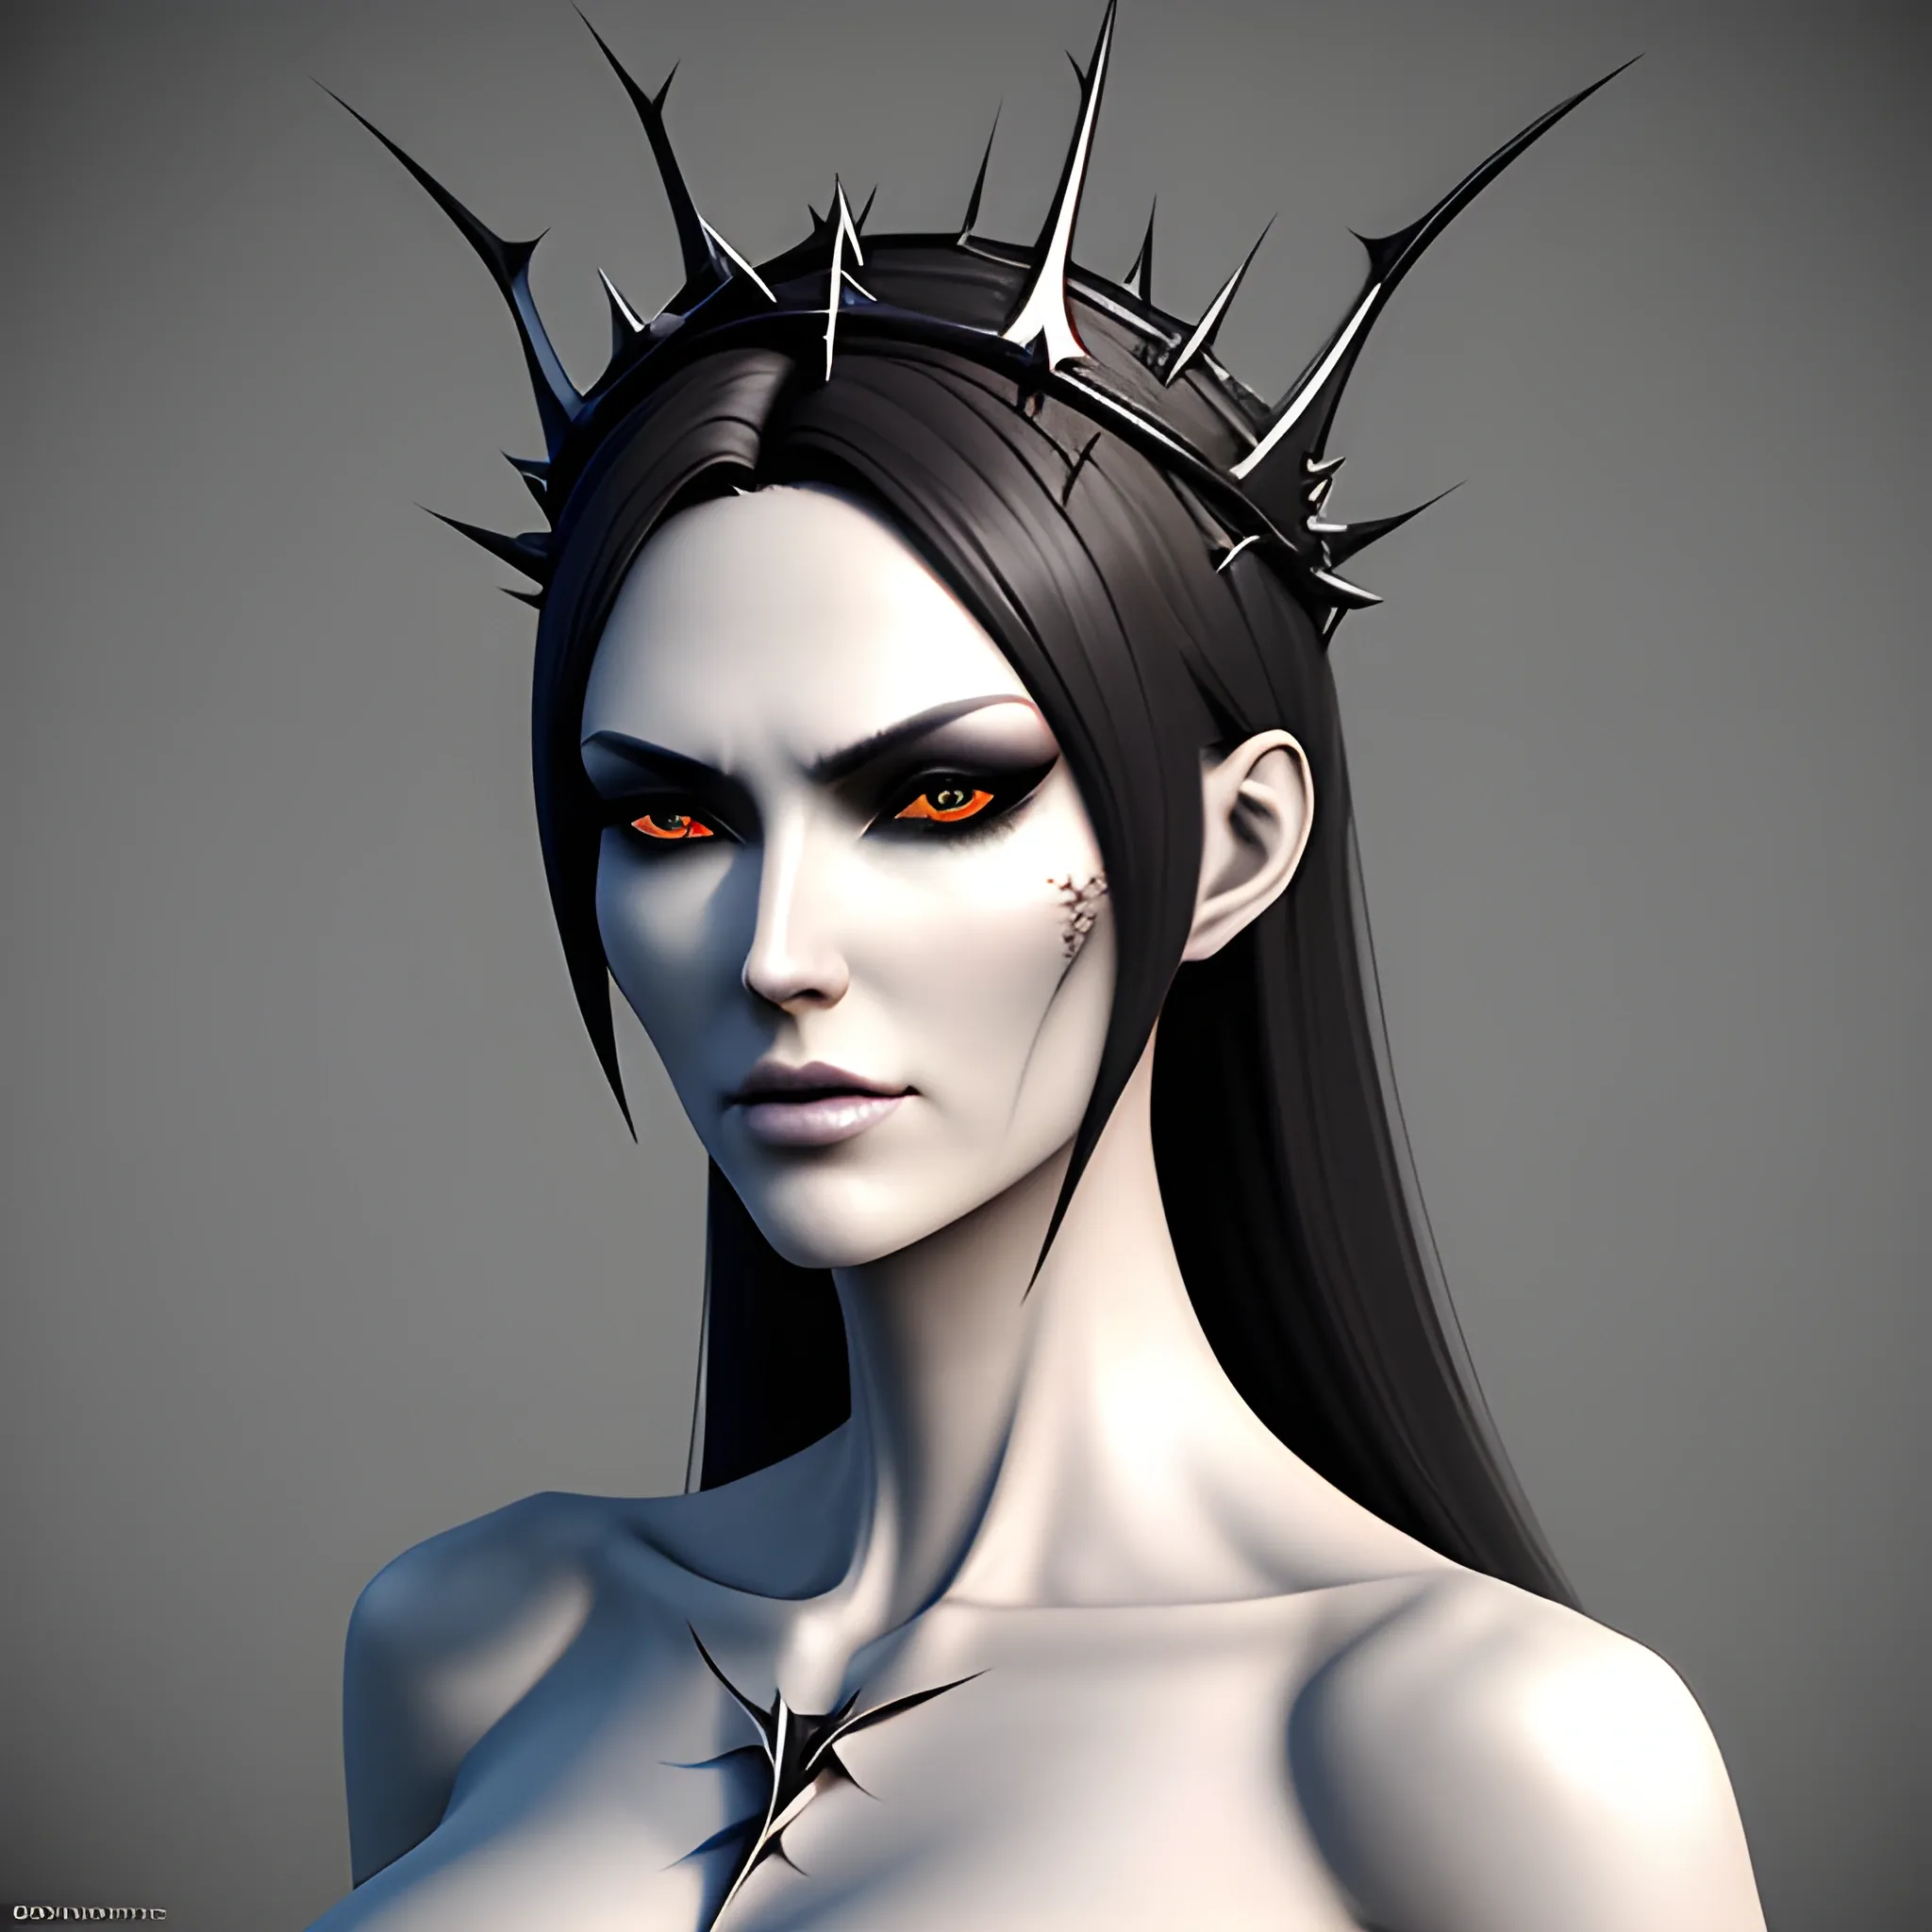 Create a hyper-detailed 3D model of a slender and stunning girl adorned with a crown made of thorns, featuring additional spikes. The design should be inspired by realistic renderings and anime-esque characters, combining elements of realistic portraiture, heistcore, and dragoncore. The model should reflect delicate realism, emphasizing dark colors throughout in original style.